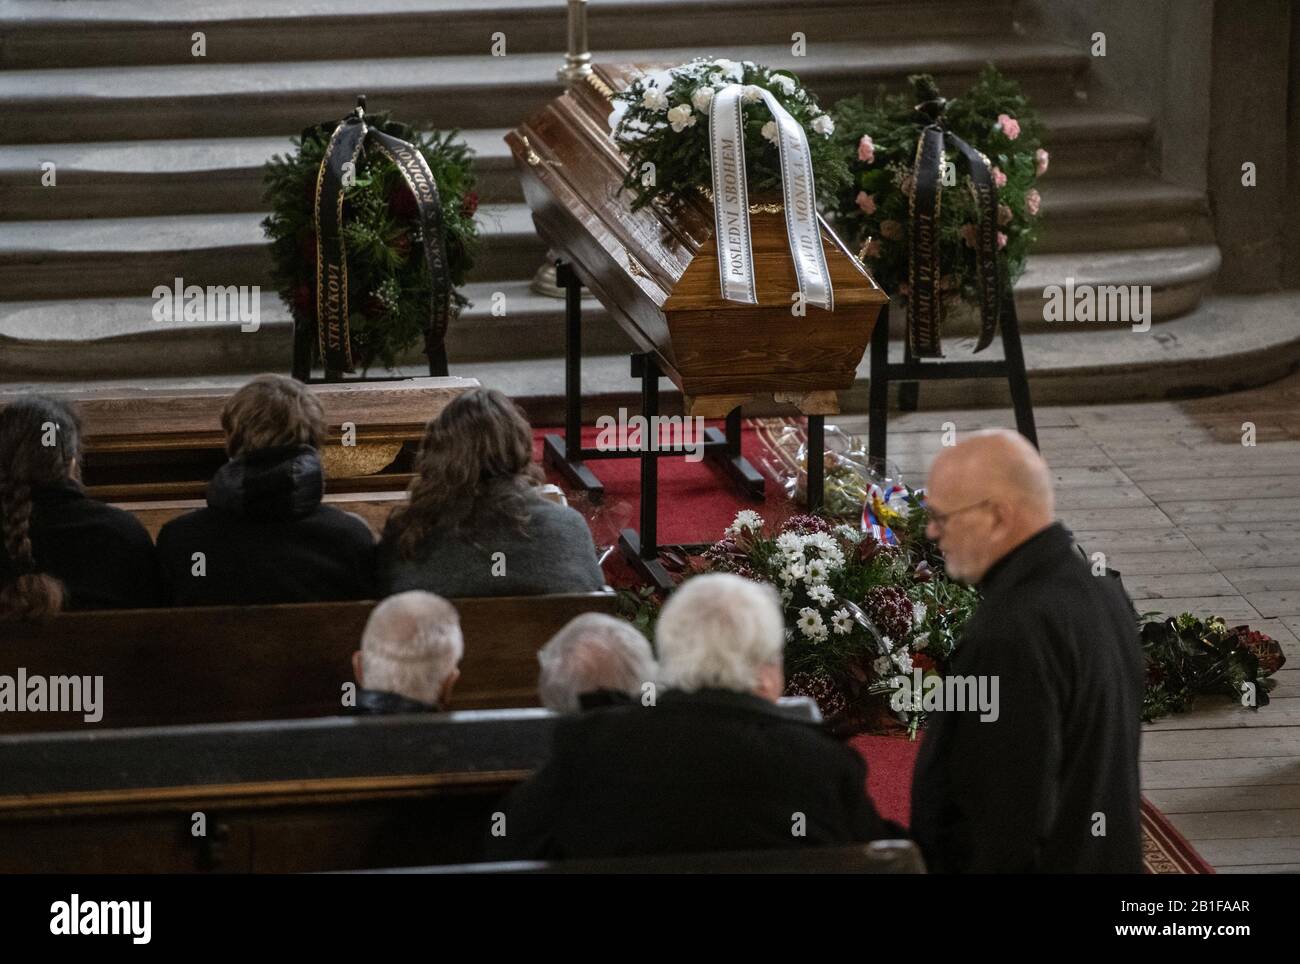 Melnik, Czech Republic. 25th Feb, 2020. Last farewell to Vladimir Hradec, who cooperated with the anti-communist resistence group of Masin brothers in the 1950s, was held on February 25, 2020, in Melnik, Czech Republic. Hradec died at the age of 88 years. Credit: Vit Cerny/CTK Photo/Alamy Live News Stock Photo